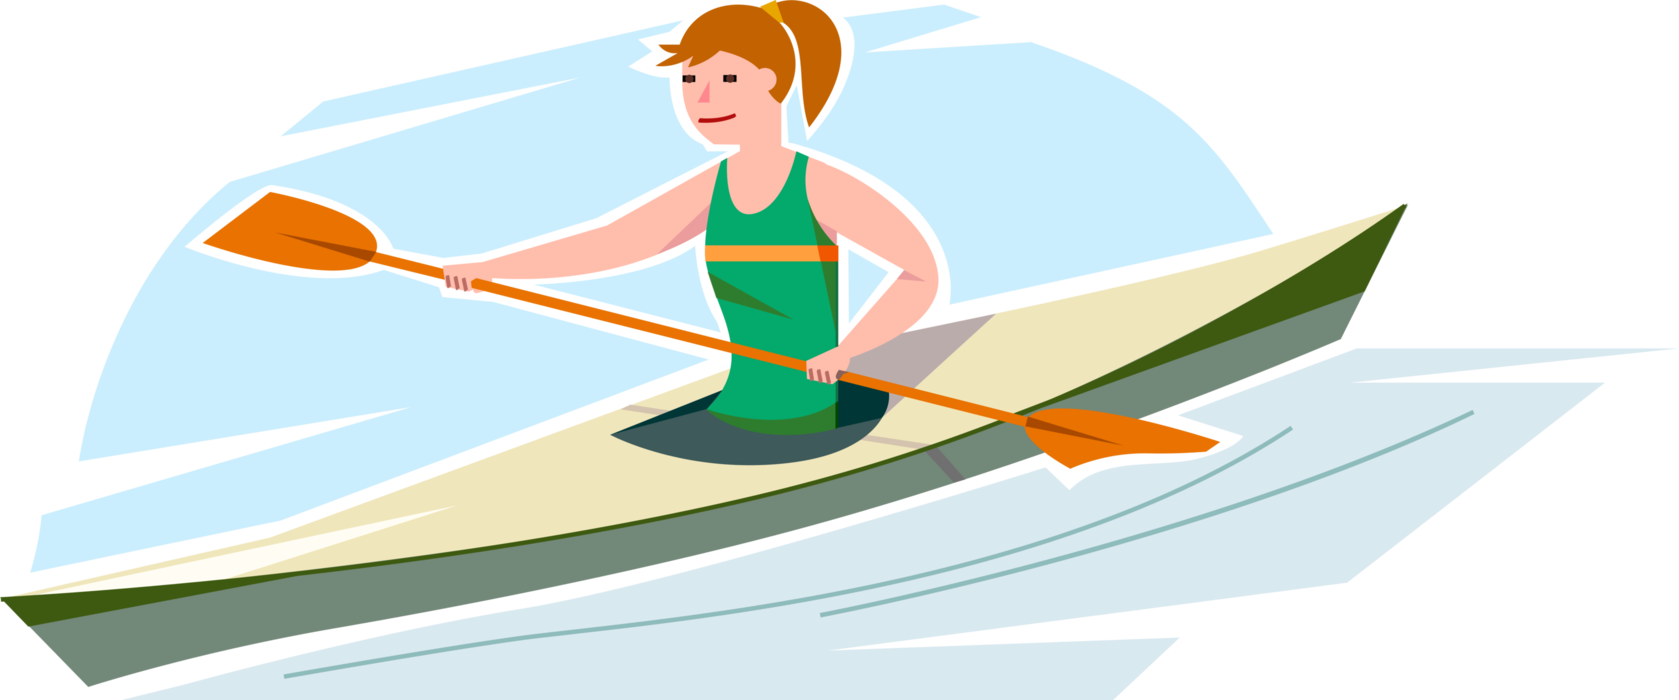 Vector Illustration of Young Adolescent Girl Paddles Kayak with Paddle Oar in Water